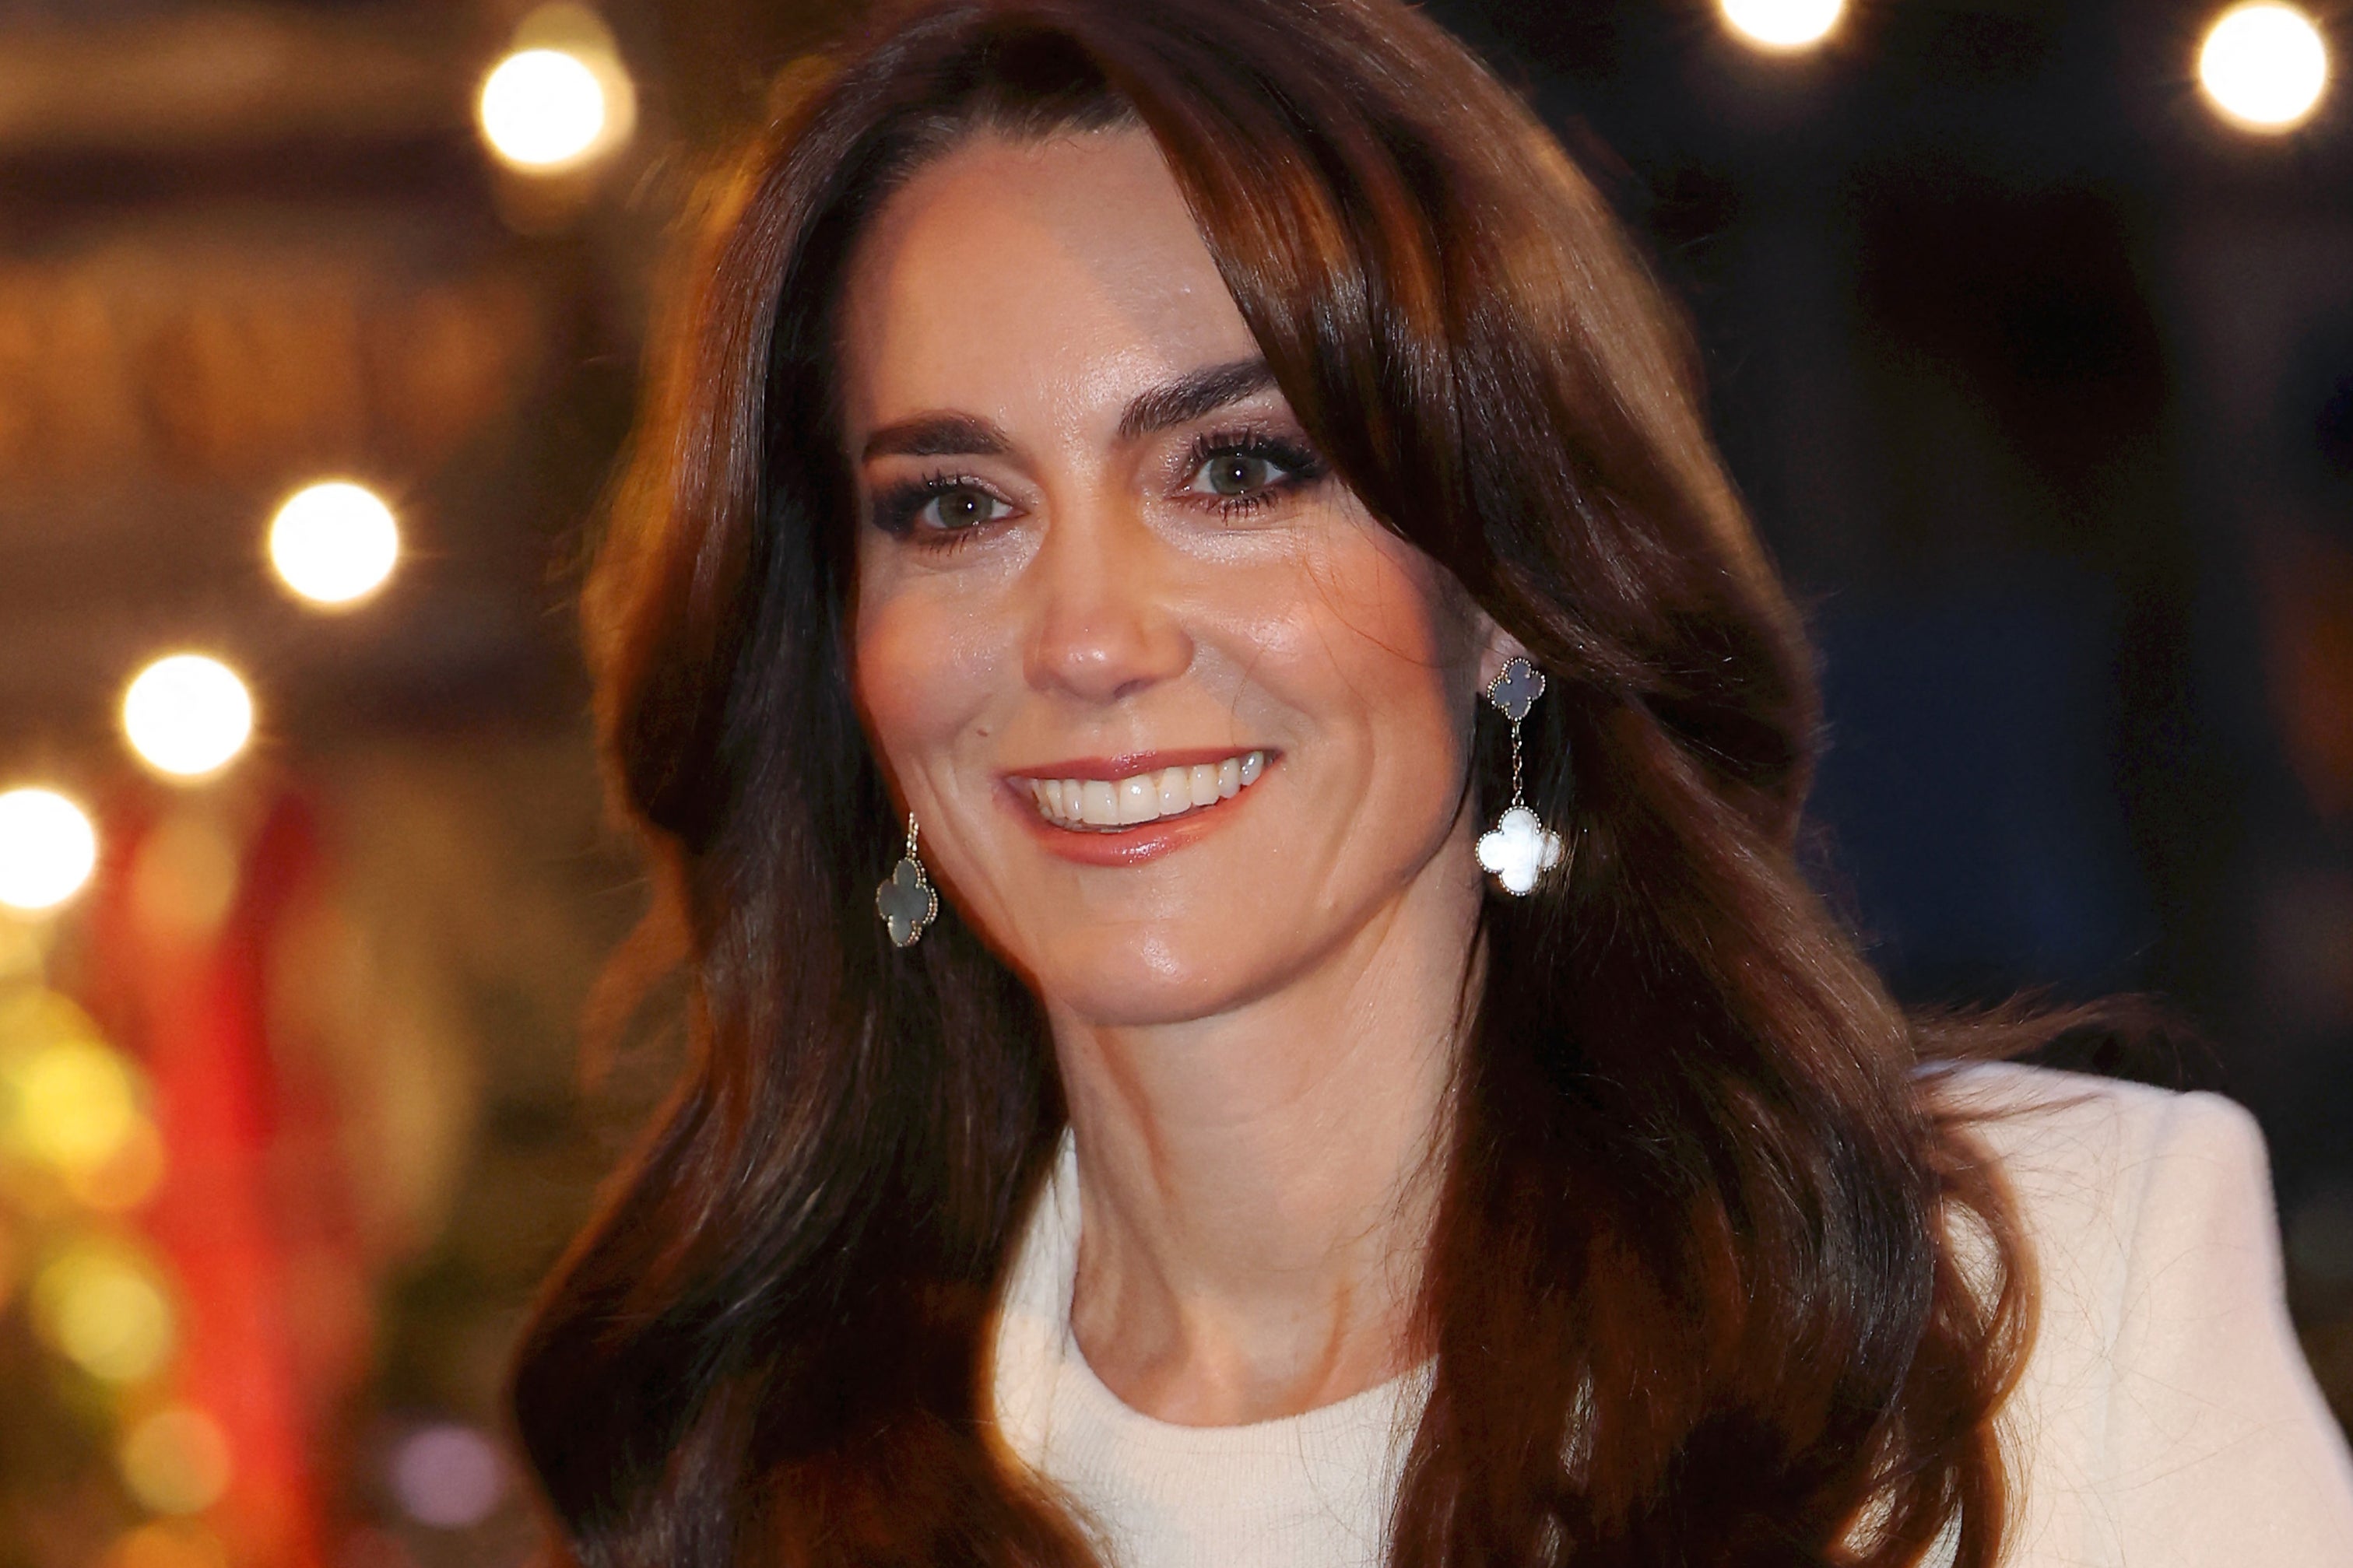 Kate Middleton recently underwent treatment for a medical issue